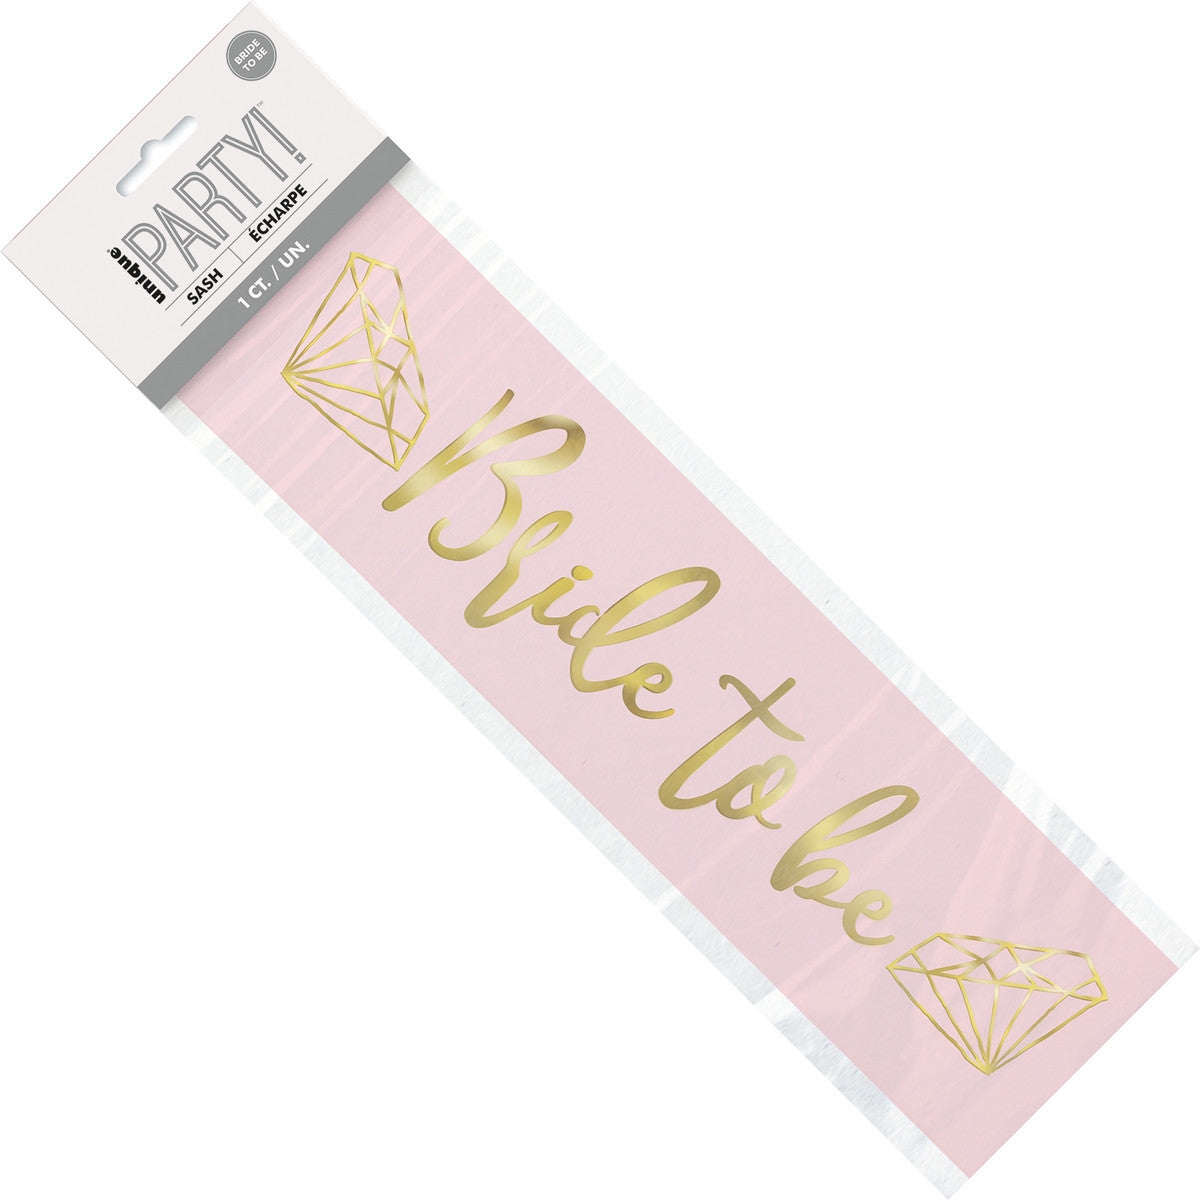 Bride To Be Sash Pink And Gold - 1 Piece - Dollars and Sense